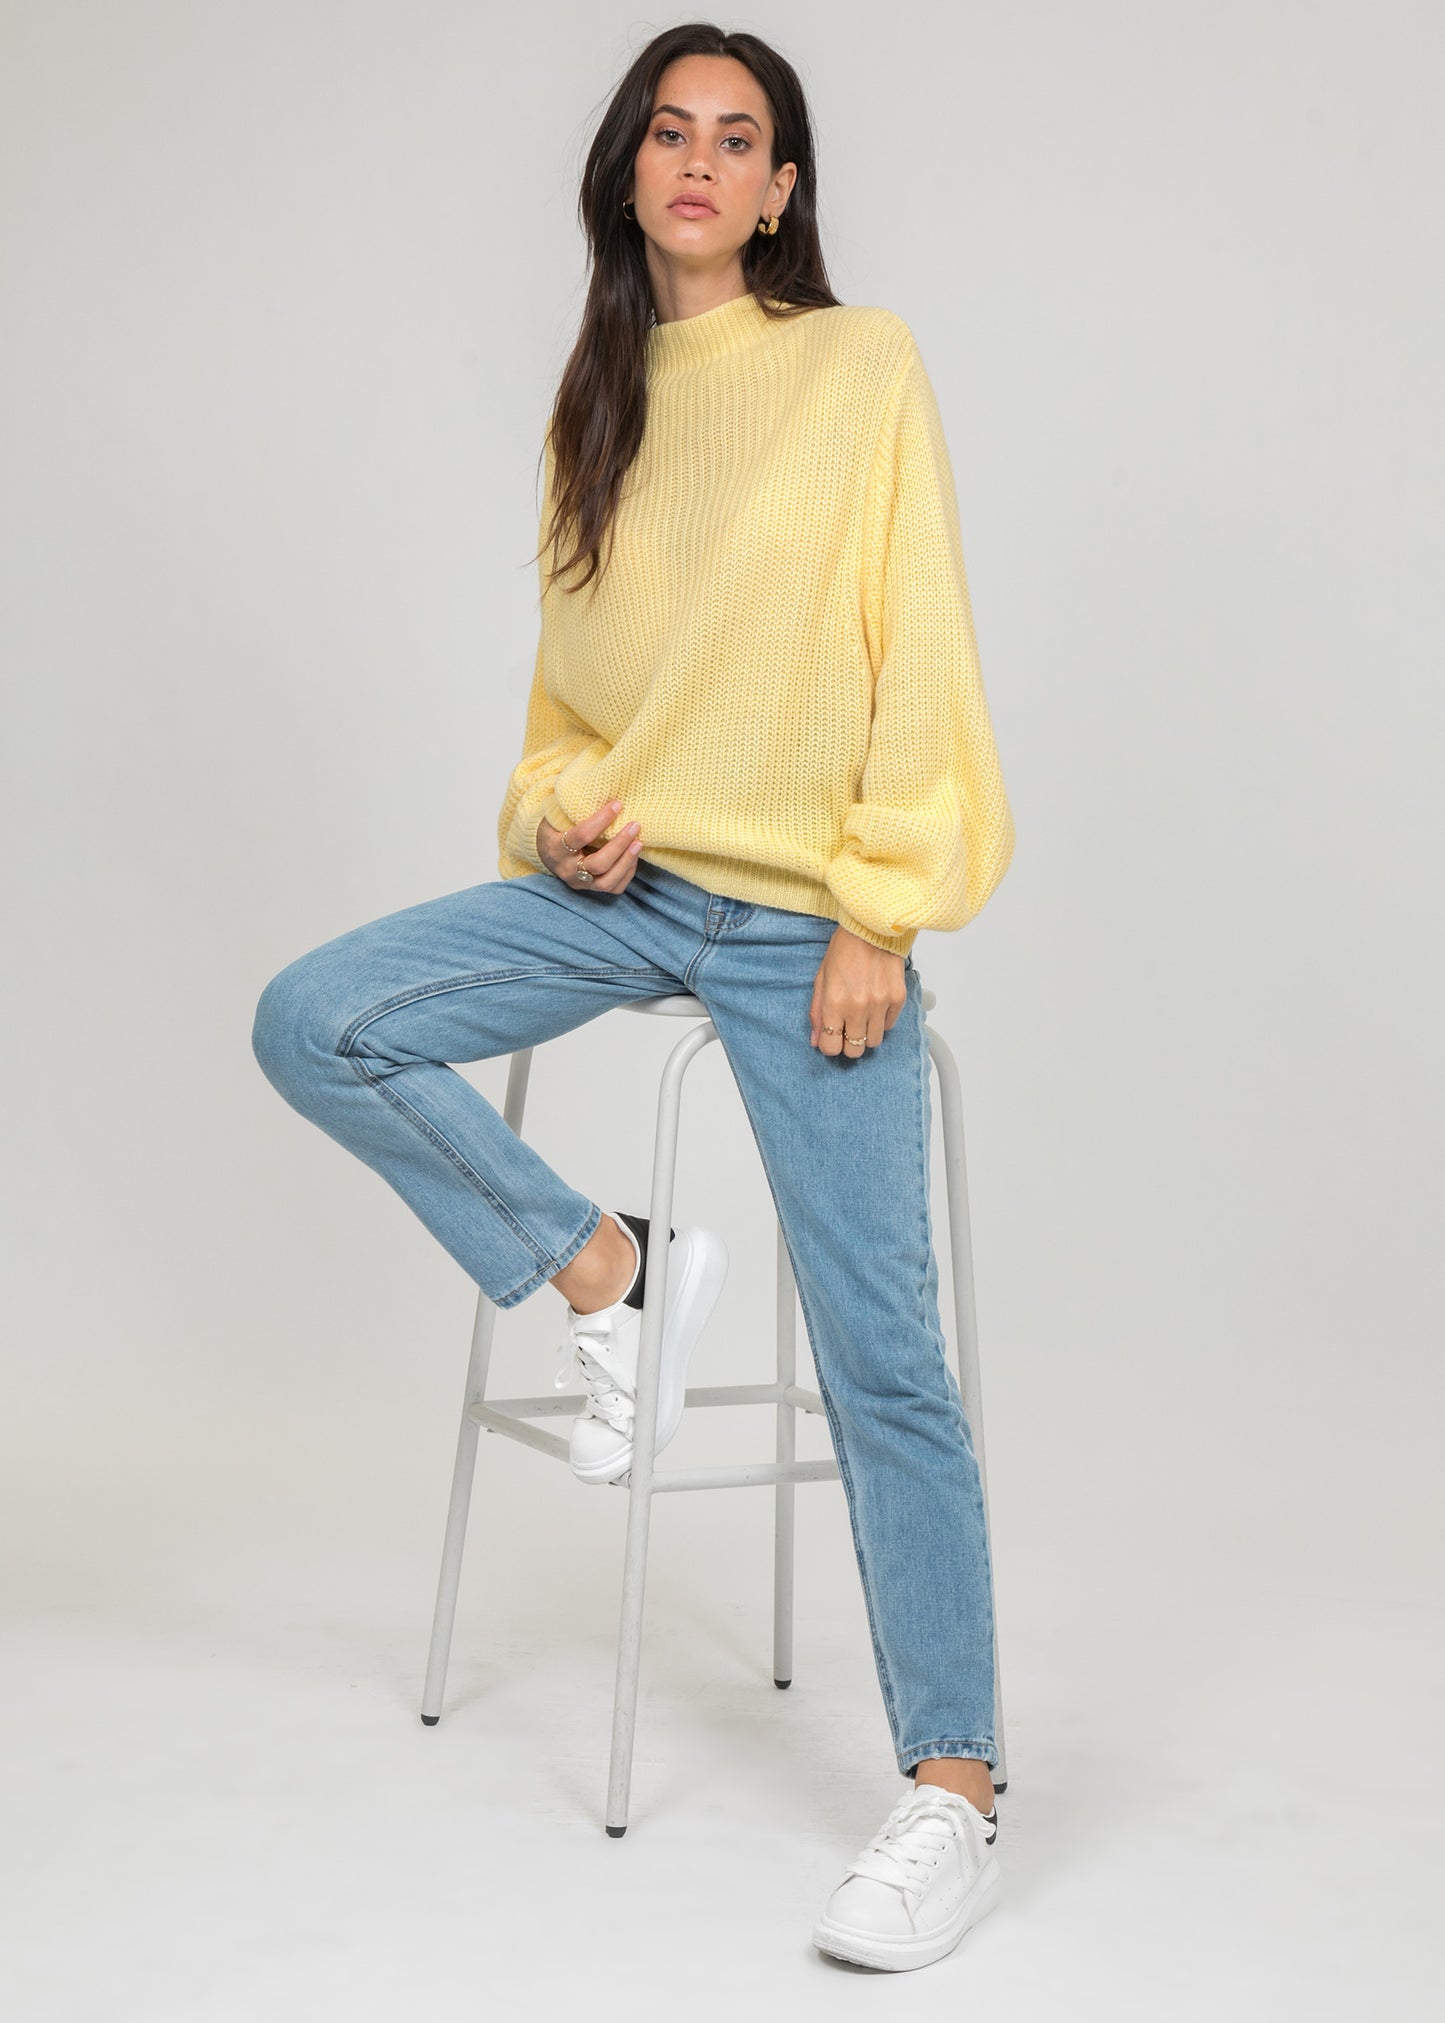 Oversize high neck jumper in yellow